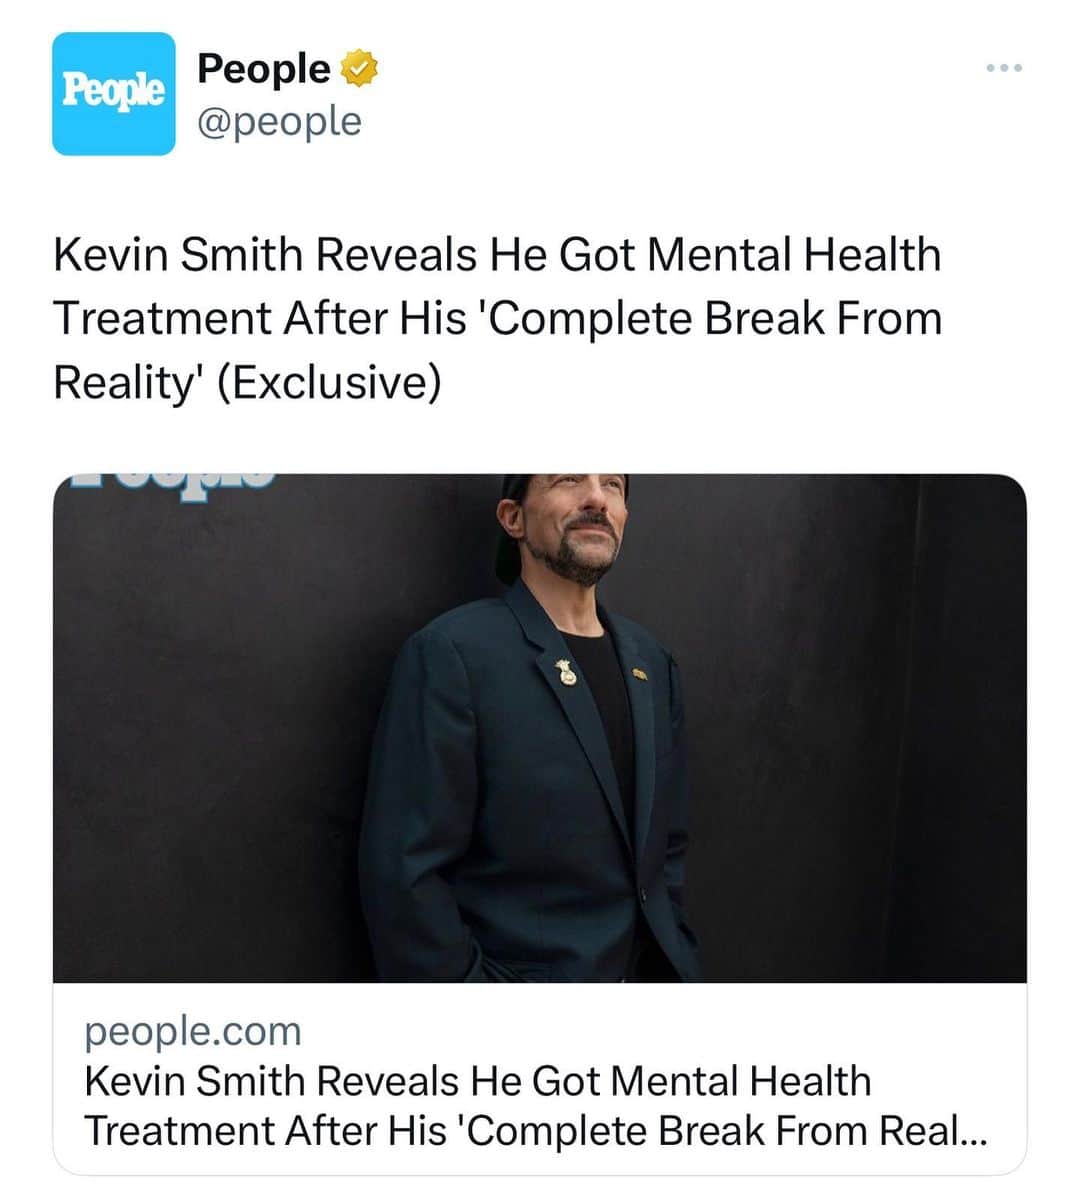 ケヴィン・スミスのインスタグラム：「Having been a creature of the Internet for 28 years now, I fully expect to get trolled for this. But if it can help some folks, it’ll be worth it. So here goes…  A few months back I went through a mental health crisis.  Rather than succumbing to grim alternatives, I sought help at a mental health facility called @sierra_tucson, where the therapists saved my life and helped me find my lost marbles.  I learned incredibly useful information on the subject of Trauma and I’ve shot a video about it, so that other folks who’ve experienced trauma and minimized it to survive (like I did) might not feel so alone, split, embarrassed or broken.  There’s *always* help out there, Kids. Don’t be afraid to ask for it. Seek it out.   At the other side of the hardest thing you’ll ever go through lies your joy. Seize it - because you deserve happiness in this very short life we’re lucky enough to get. As bad as troubles can get, it can always get better.  Don’t waste your time obsessing over the unchangeable past, stop worrying about the unknowable future, and focus on this moment: the here and now. And breathe.  Before I left the place that helped me, my therapist wrote these words down on an index card that I will always carry with me for the rest of my days:  “You do not have to earn love. You are lovable simply because you exist.”  It’s a simple sentiment, true - but one I’ve needed to hear for decades. I hope it brings you as much comfort as it has brought me.  I wanna thank @people for helping me get the word out and hosting my mental health video. To watch the 35 minute talk, go to the #peoplemagazine @youtube page. There’s nothing to buy, as I’m not selling anything. But after my heart attack, I’d tell the story about it everywhere - from the @colbertlateshow, to podcasts, to medical convocations. And over the course of the last 5 years, I’ve met and heard from thousands of folks who said that receiving the heart attack information made them look into their own heart health or the heart health of their loved ones - which in turn saved some actual lives. And while some folks experience heart problems, EVERYBODY suffers from trauma.  I wish you the absolute best. #KevinSmith」